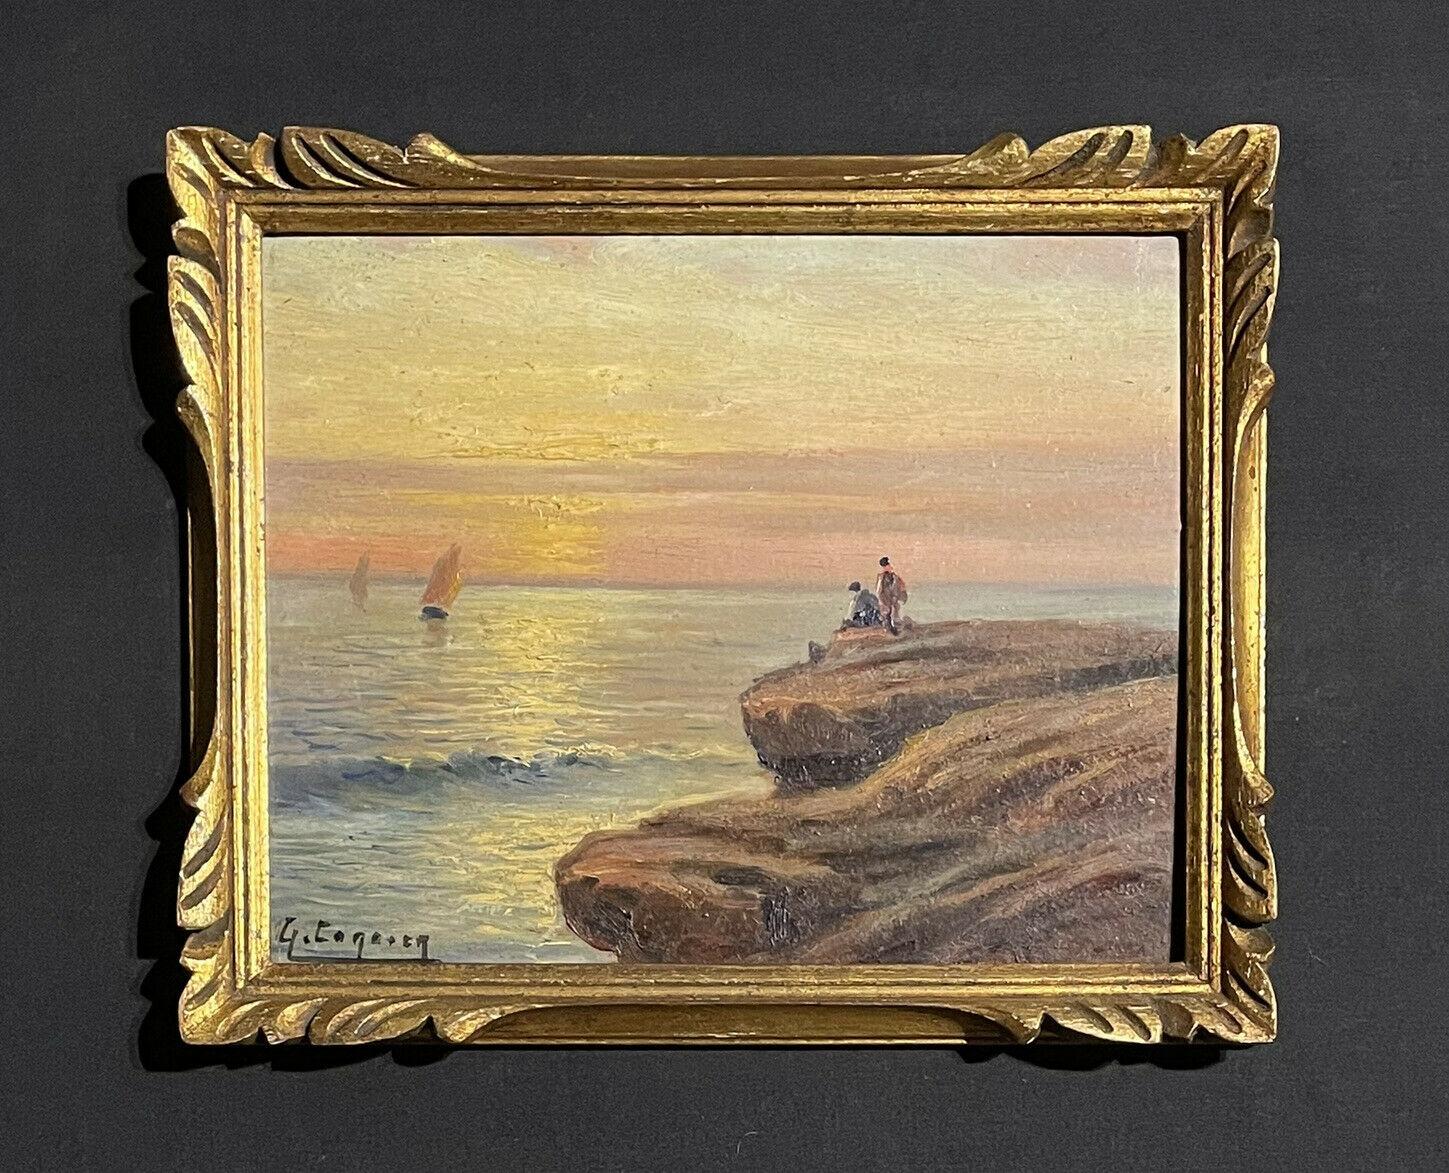 sunset over the sea painting